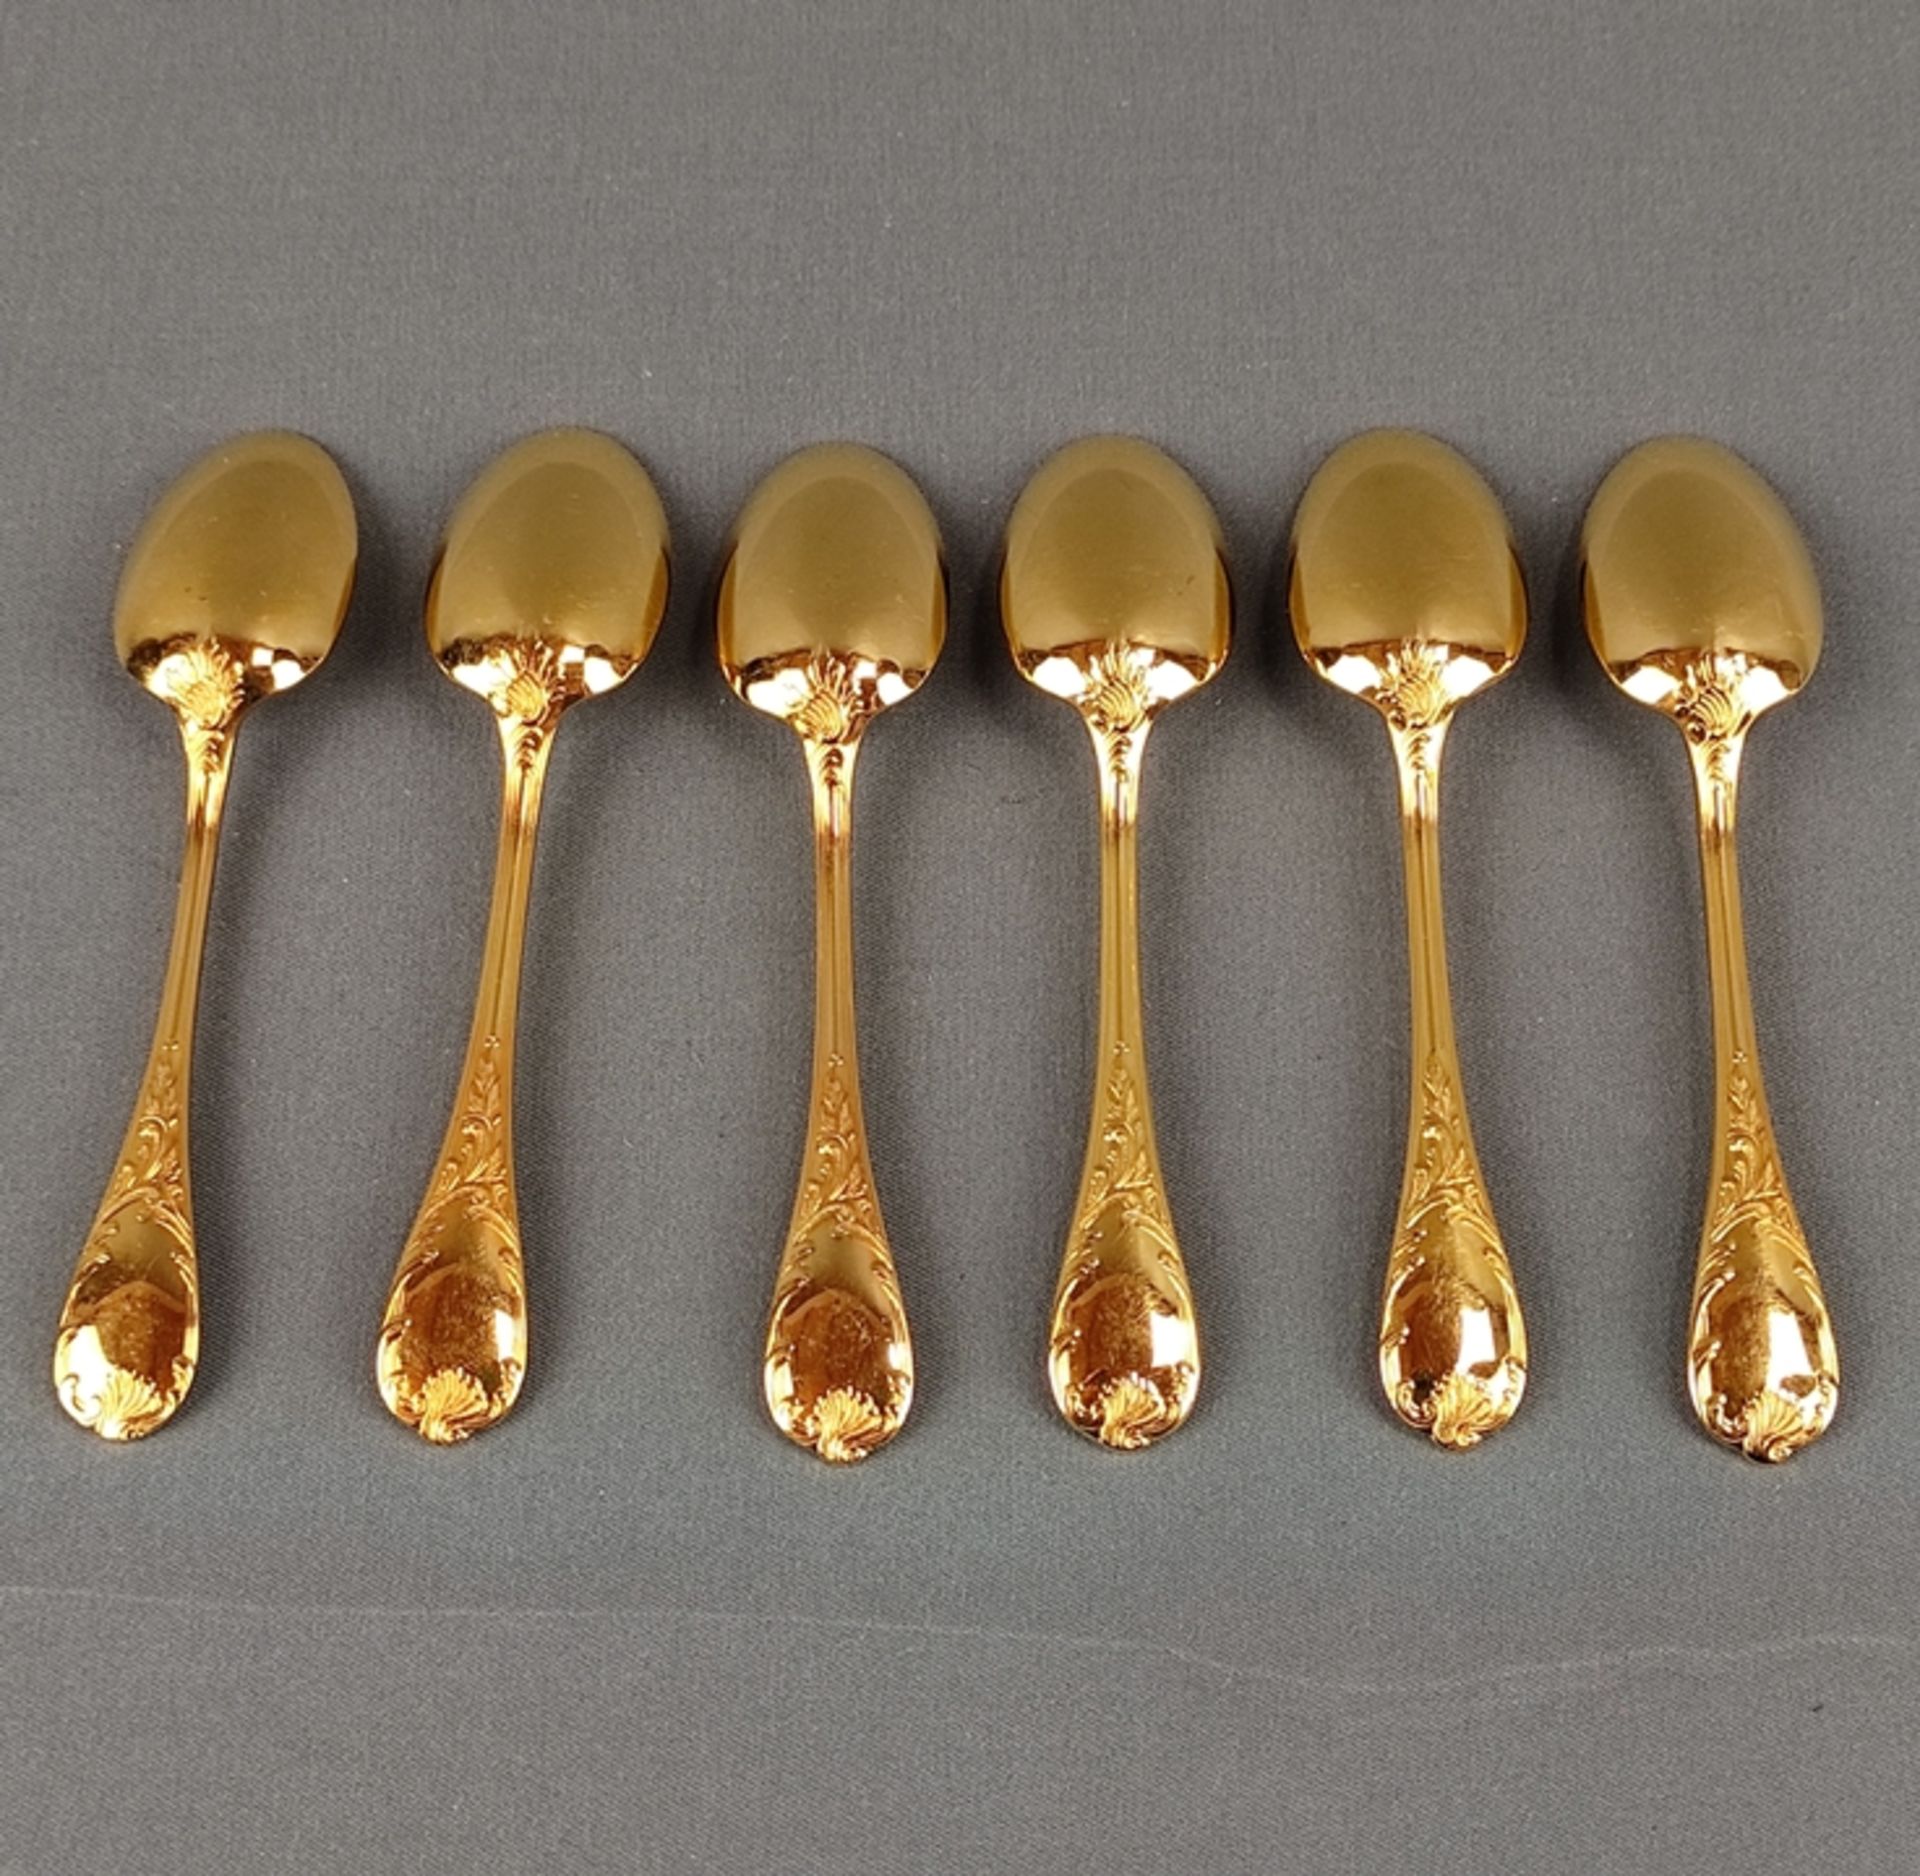 6 Mocca spoons, Christofle Paris, gold-plated, length 10cm each *405/03 (internal) - Image 2 of 5